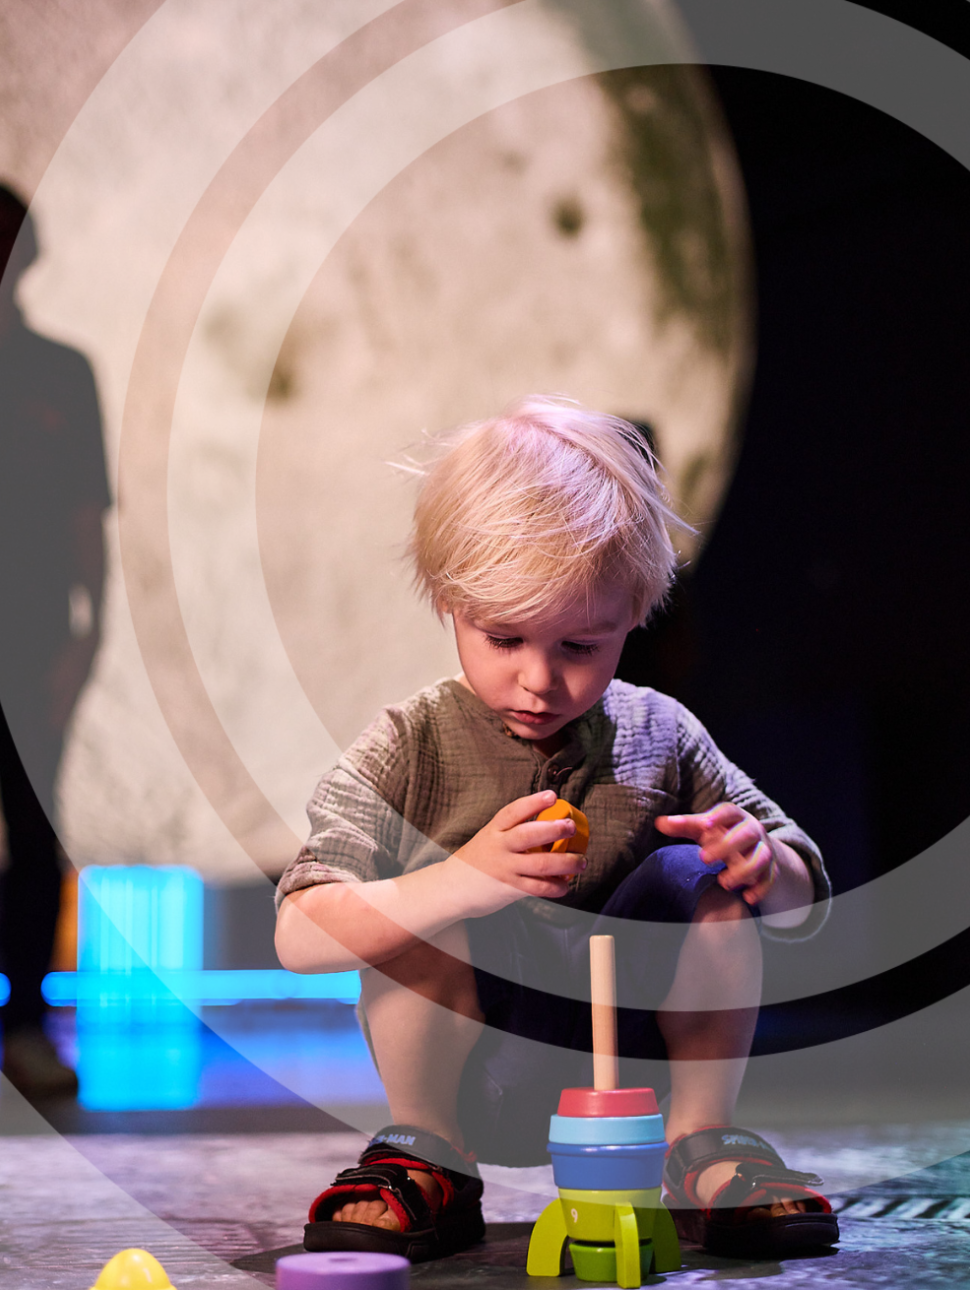  A young child playing with a vibrant rocket toy amidst a backdrop of a luminous, larger-than-life moon installation.